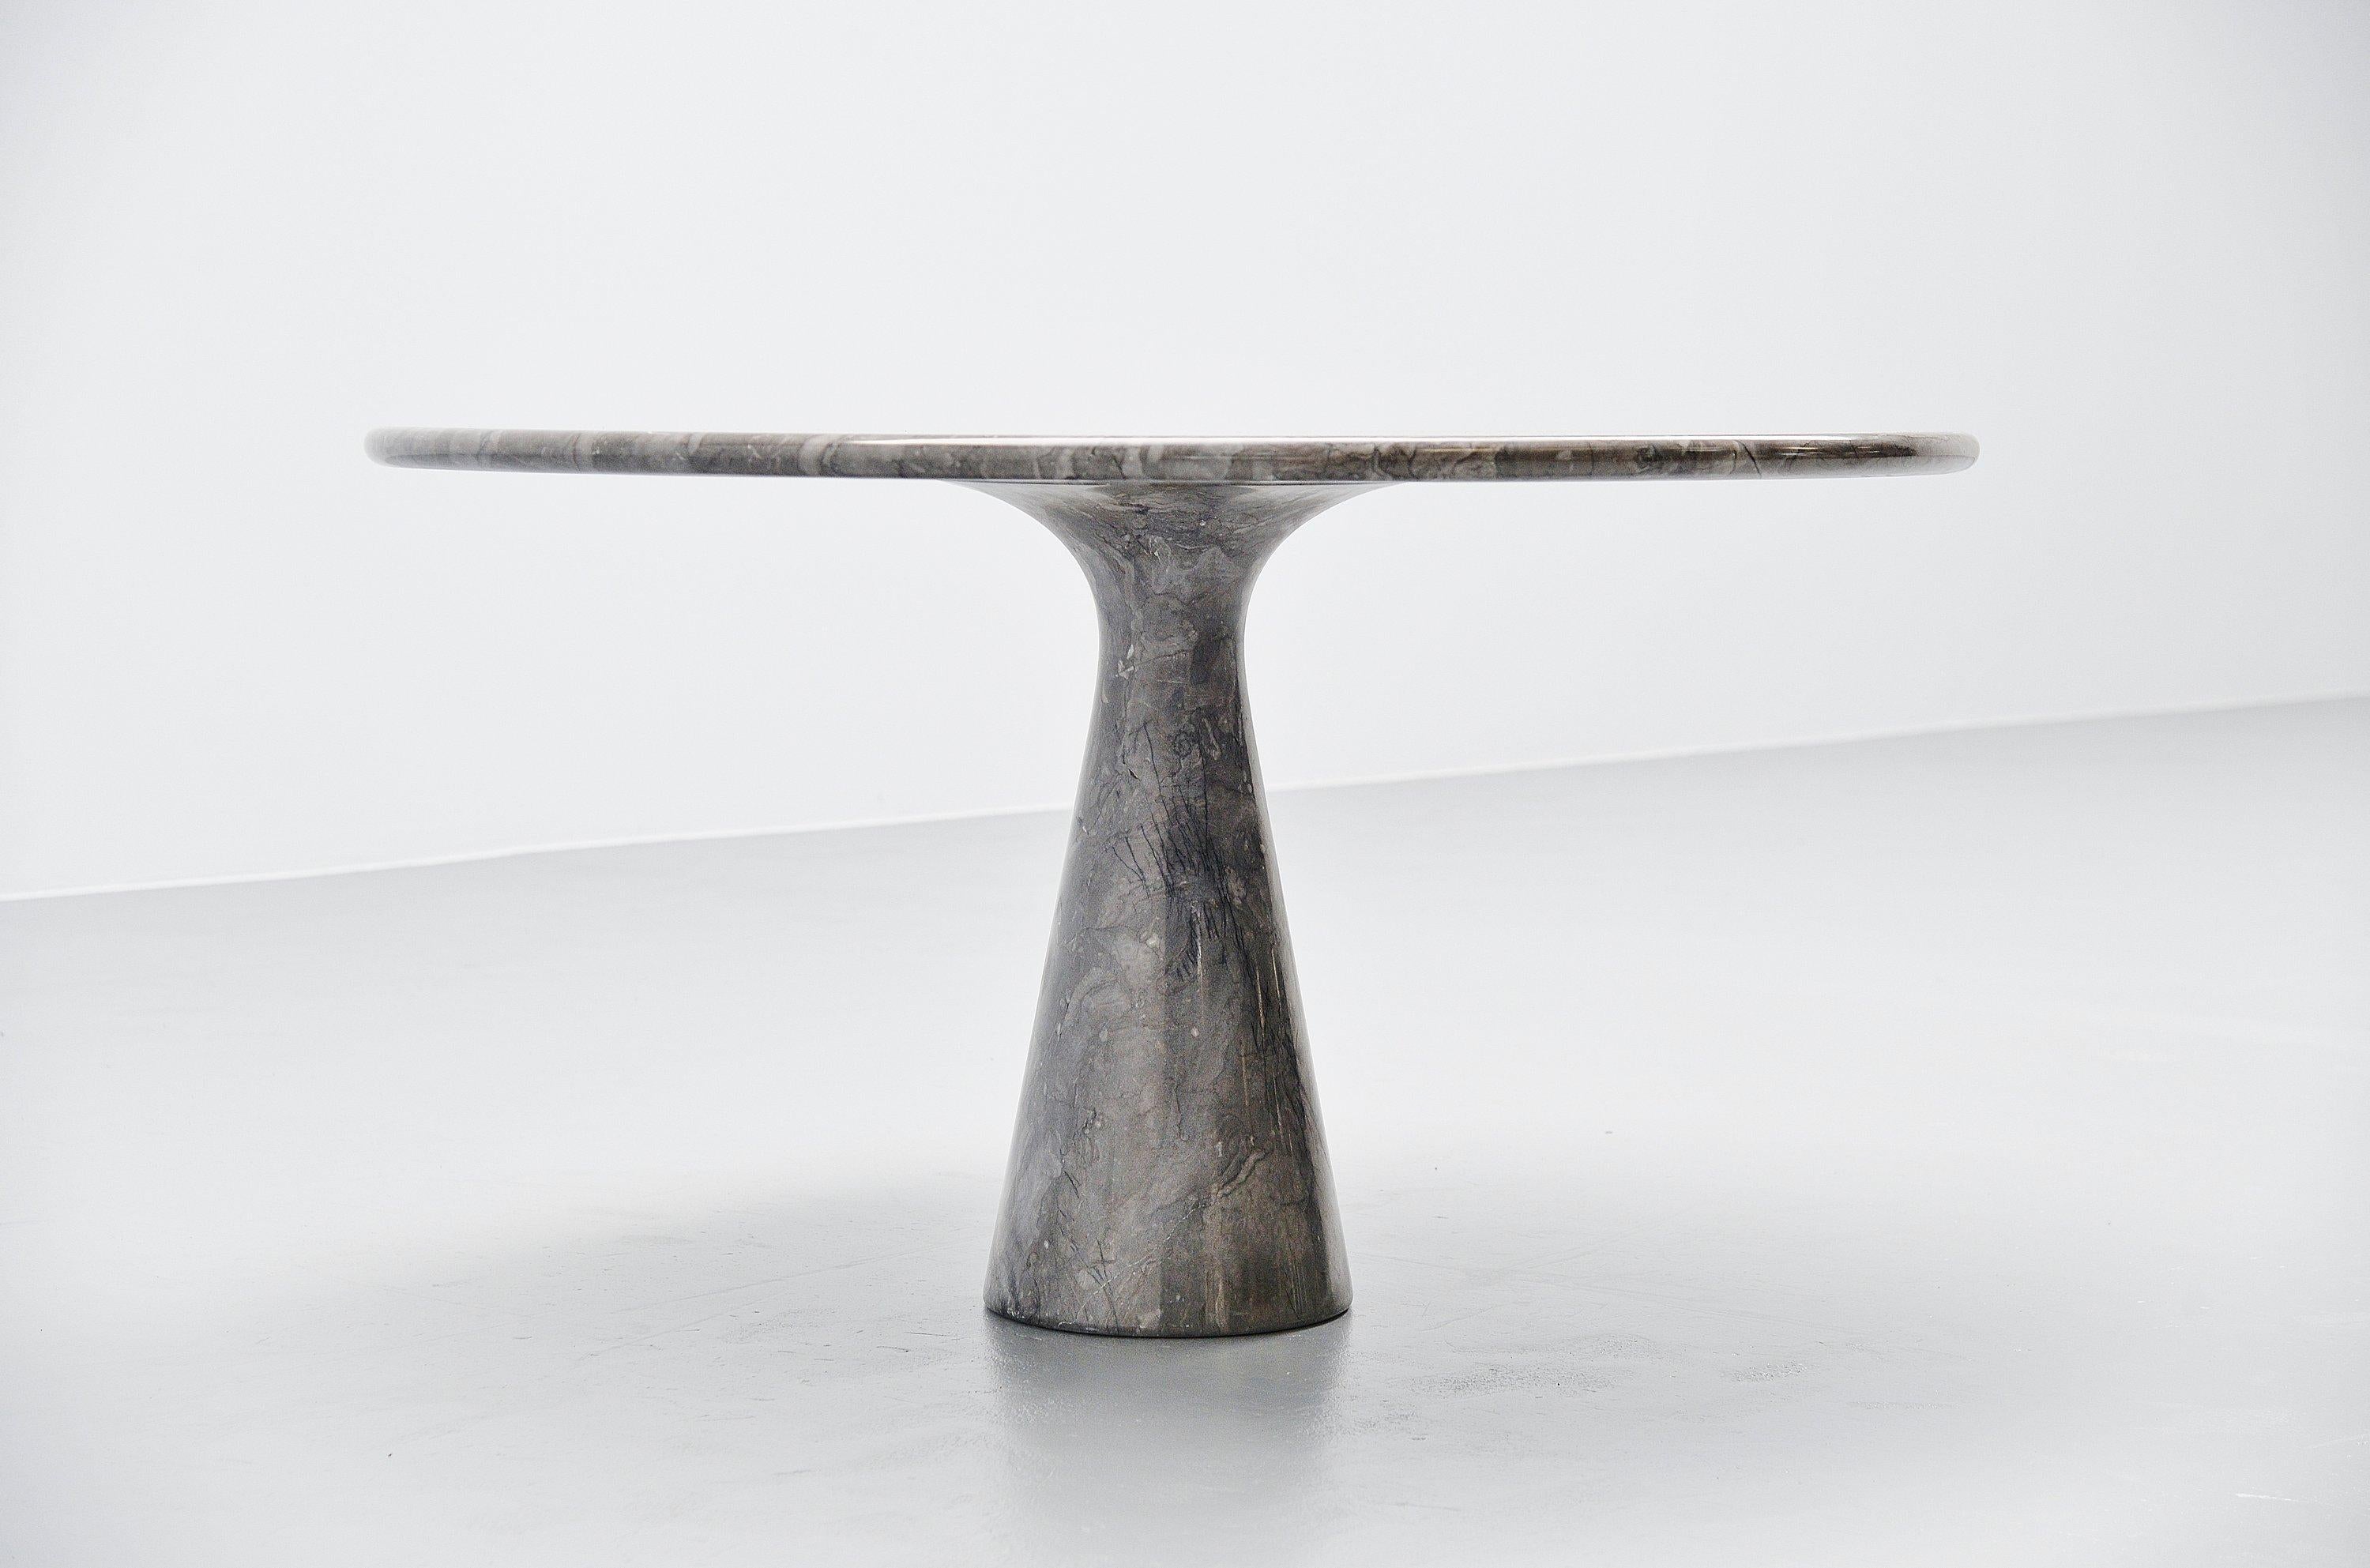 Fantastic unique marble M1T70 dining table designed by Angelo Mangiarotti and manufactured by Skipper, Italy, 1969. This is for a solid and beautiful grey marble dining table. The light grey marble has nice white veins to it and there are some kind